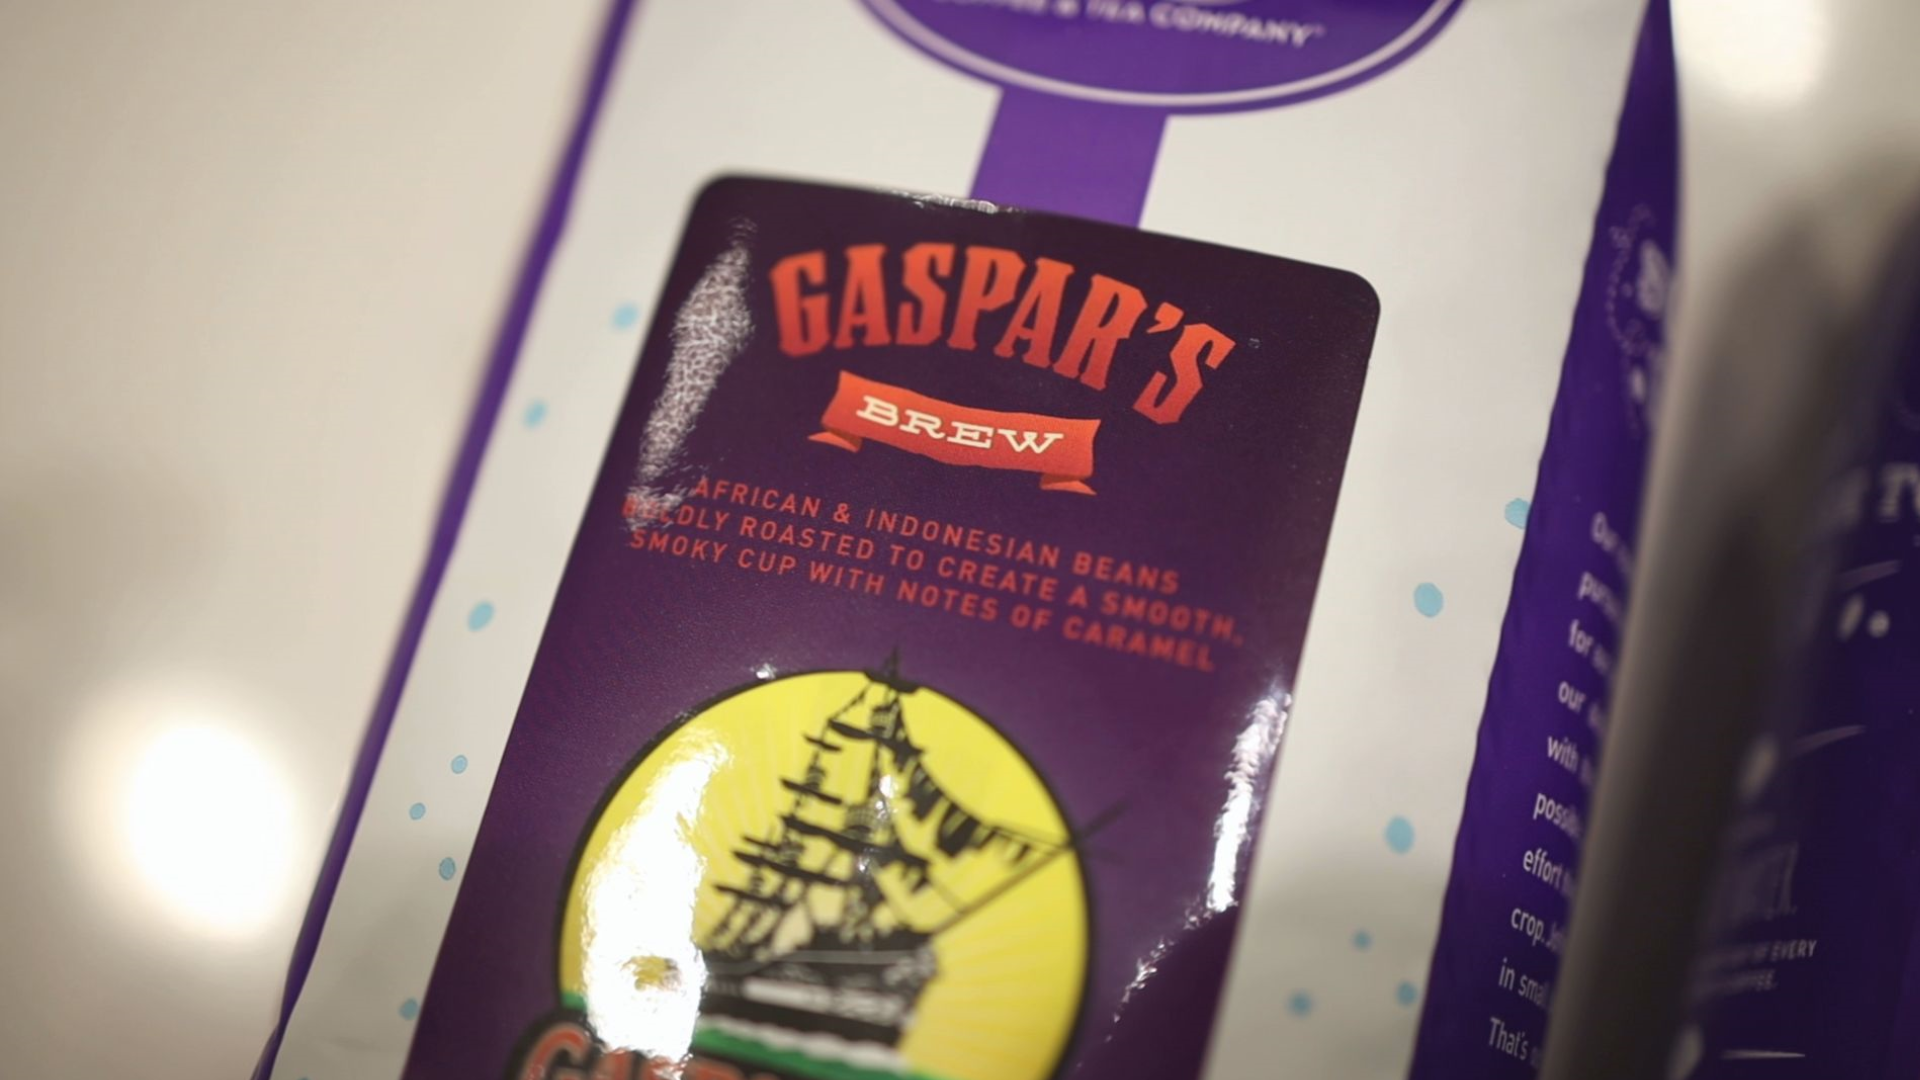 As Tampa Bay and pirate krewes wait for Gasparilla, they can prepare their brunches with "Gaspar’s Brew," Gasparilla’s official coffee.